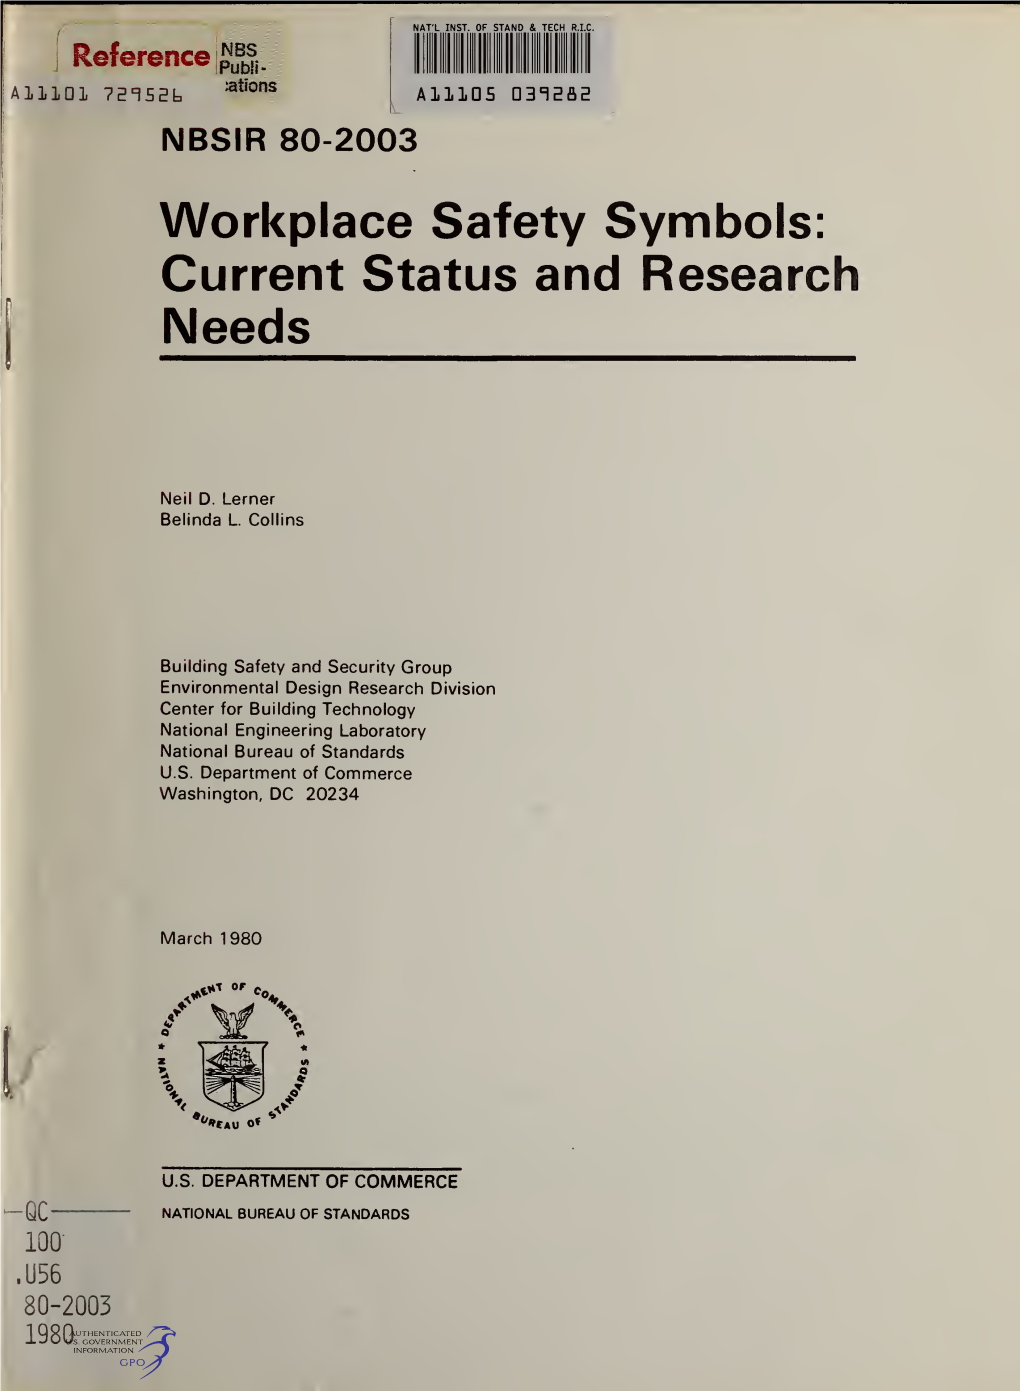 Workplace Safety Symbols: Current Status and Research Needs